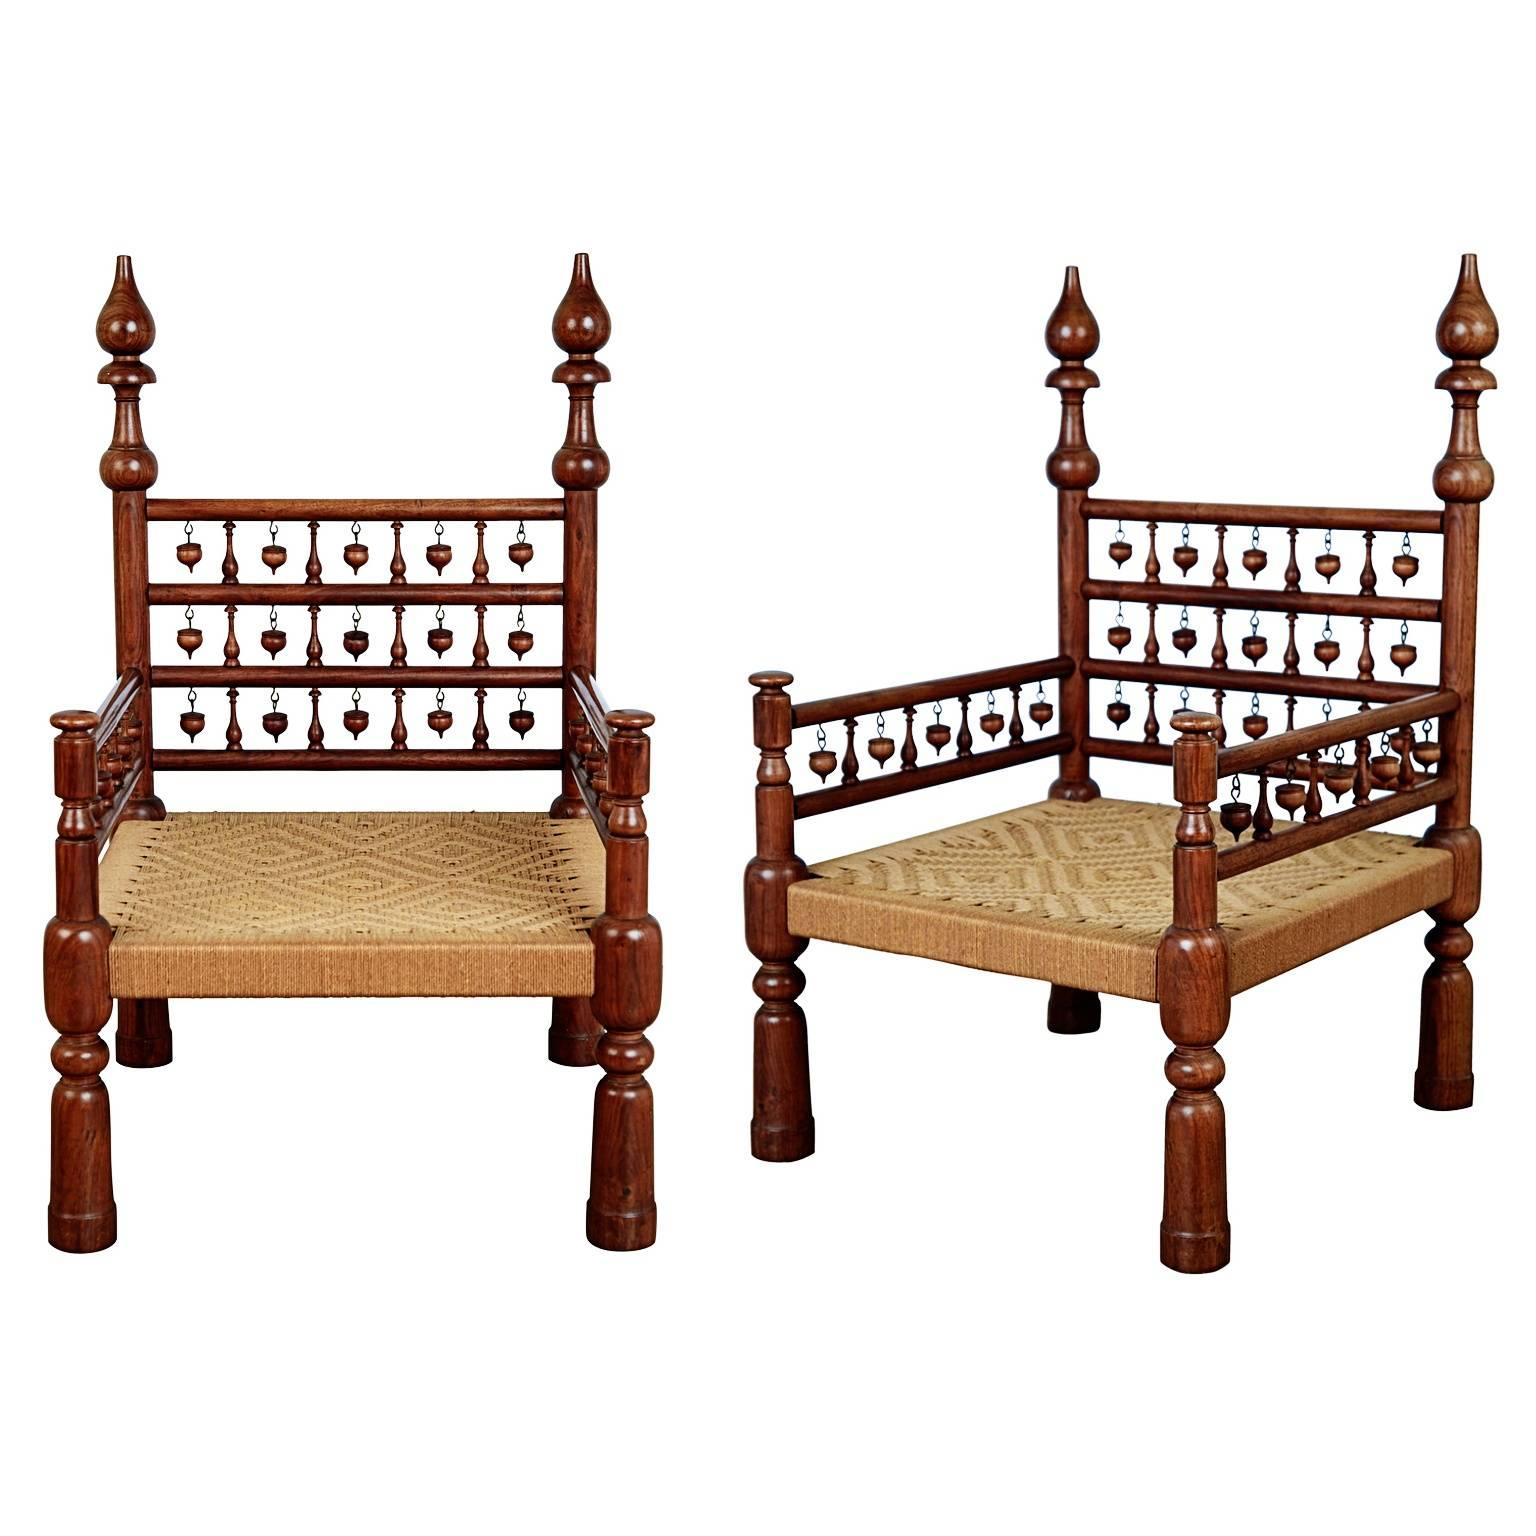 Pair of wonderfully unique Moorish throne chairs that fit right in with the current Moroccan trend dominating many interiors right now. These meticulously crafted armchairs feature rush seats with diamond motif and a solid teak frame composed of